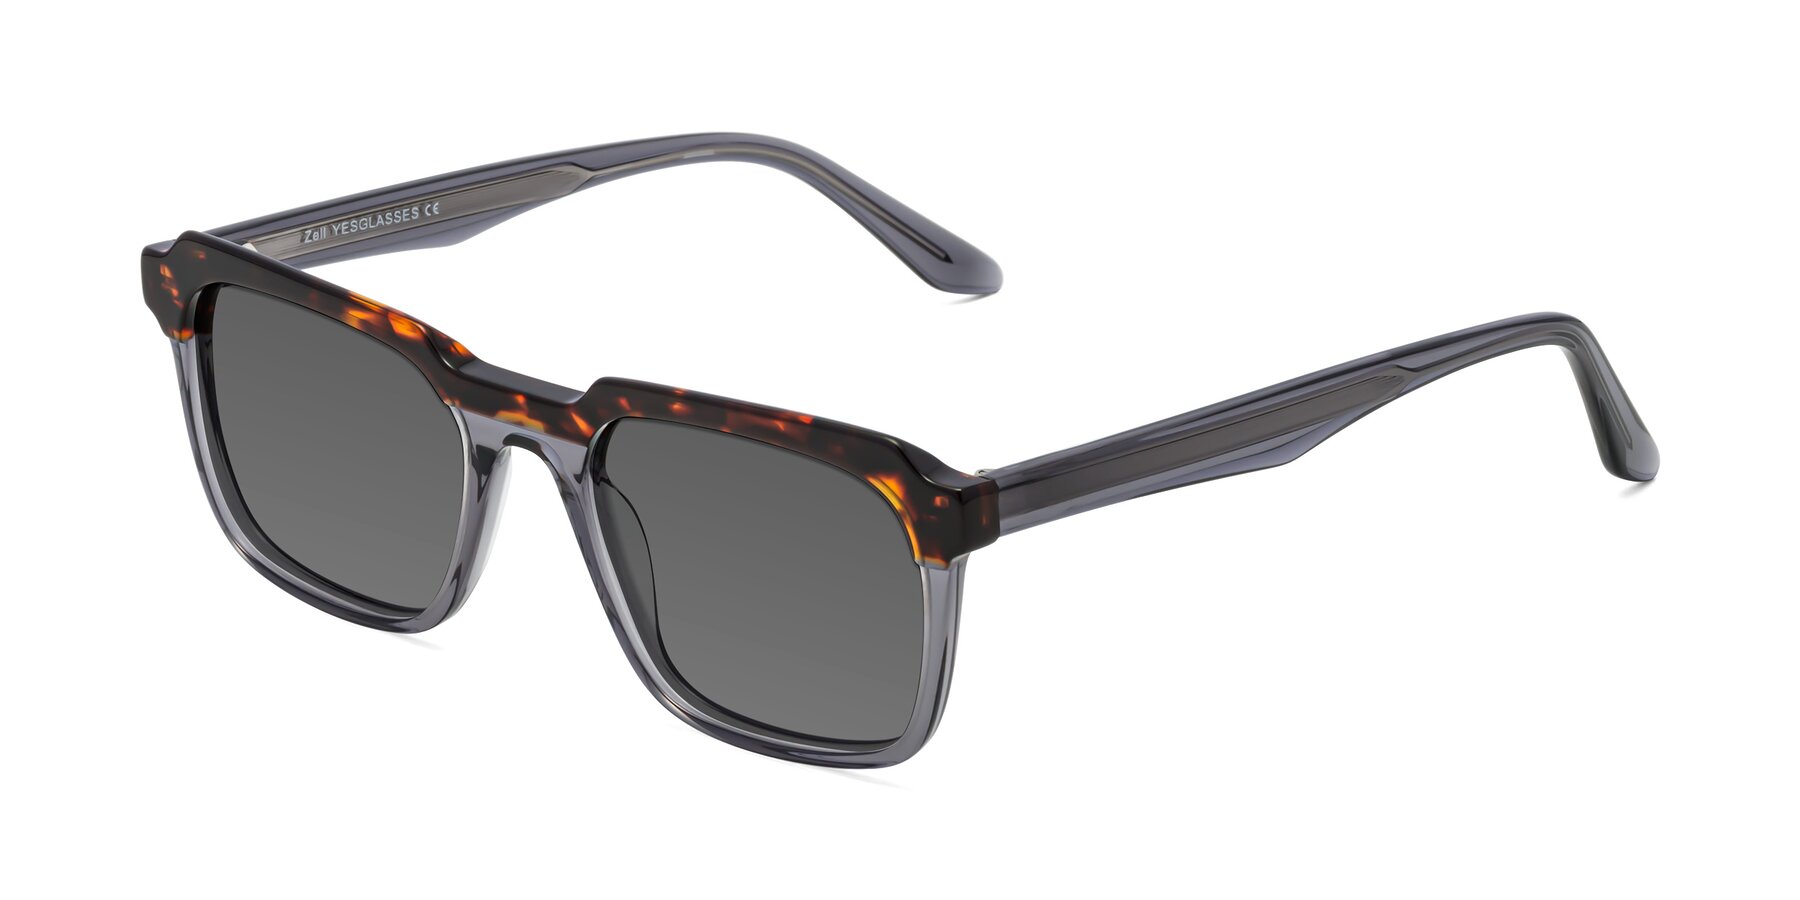 Angle of Zell in Tortoise/Gray with Medium Gray Tinted Lenses